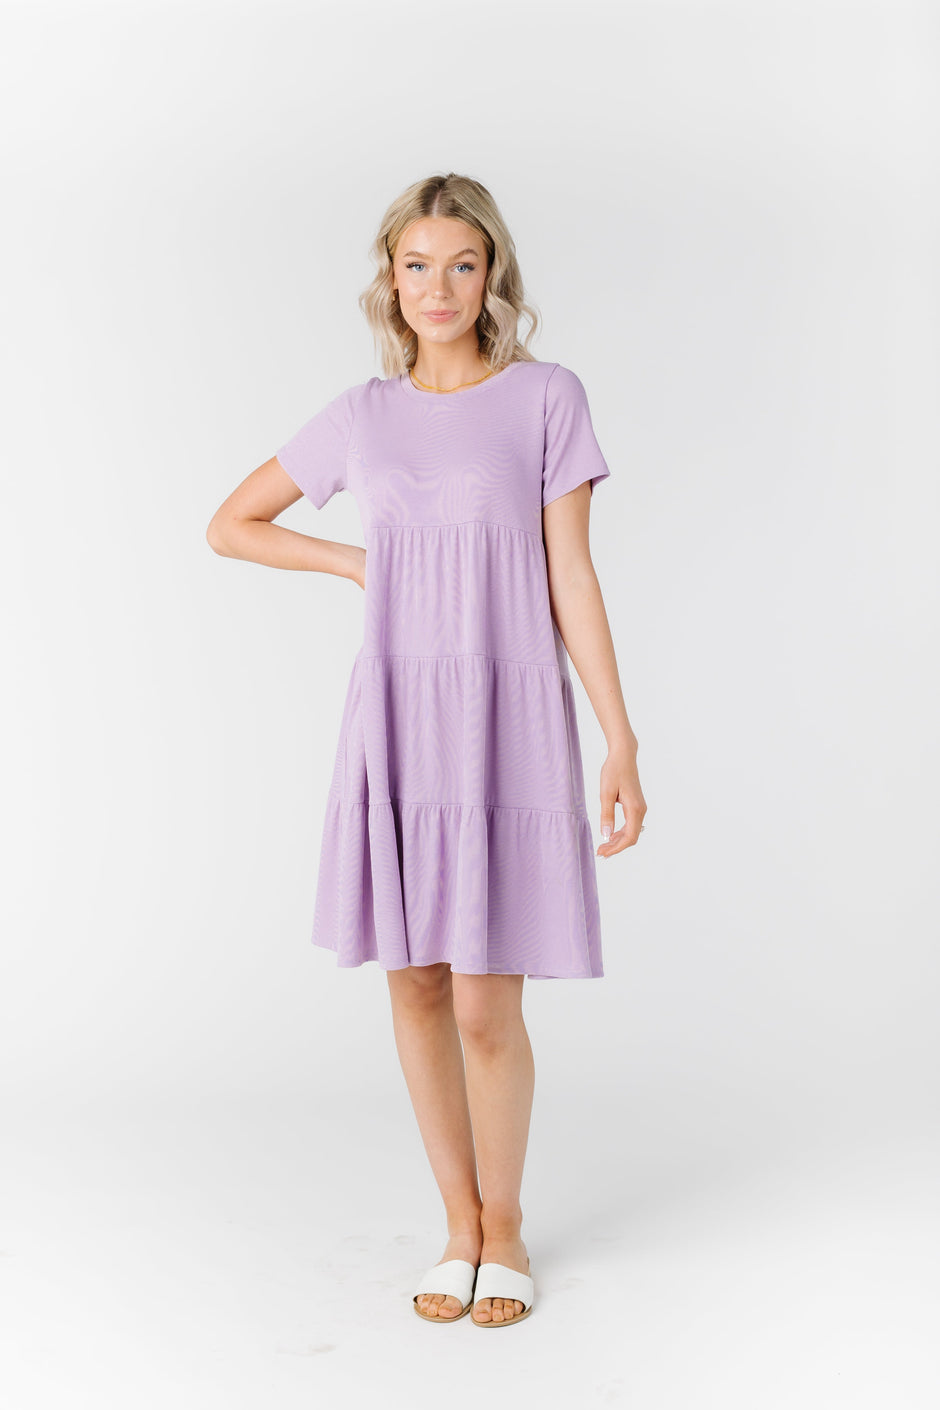 Dresses For Any Occasion – Called to Surf – Page 4